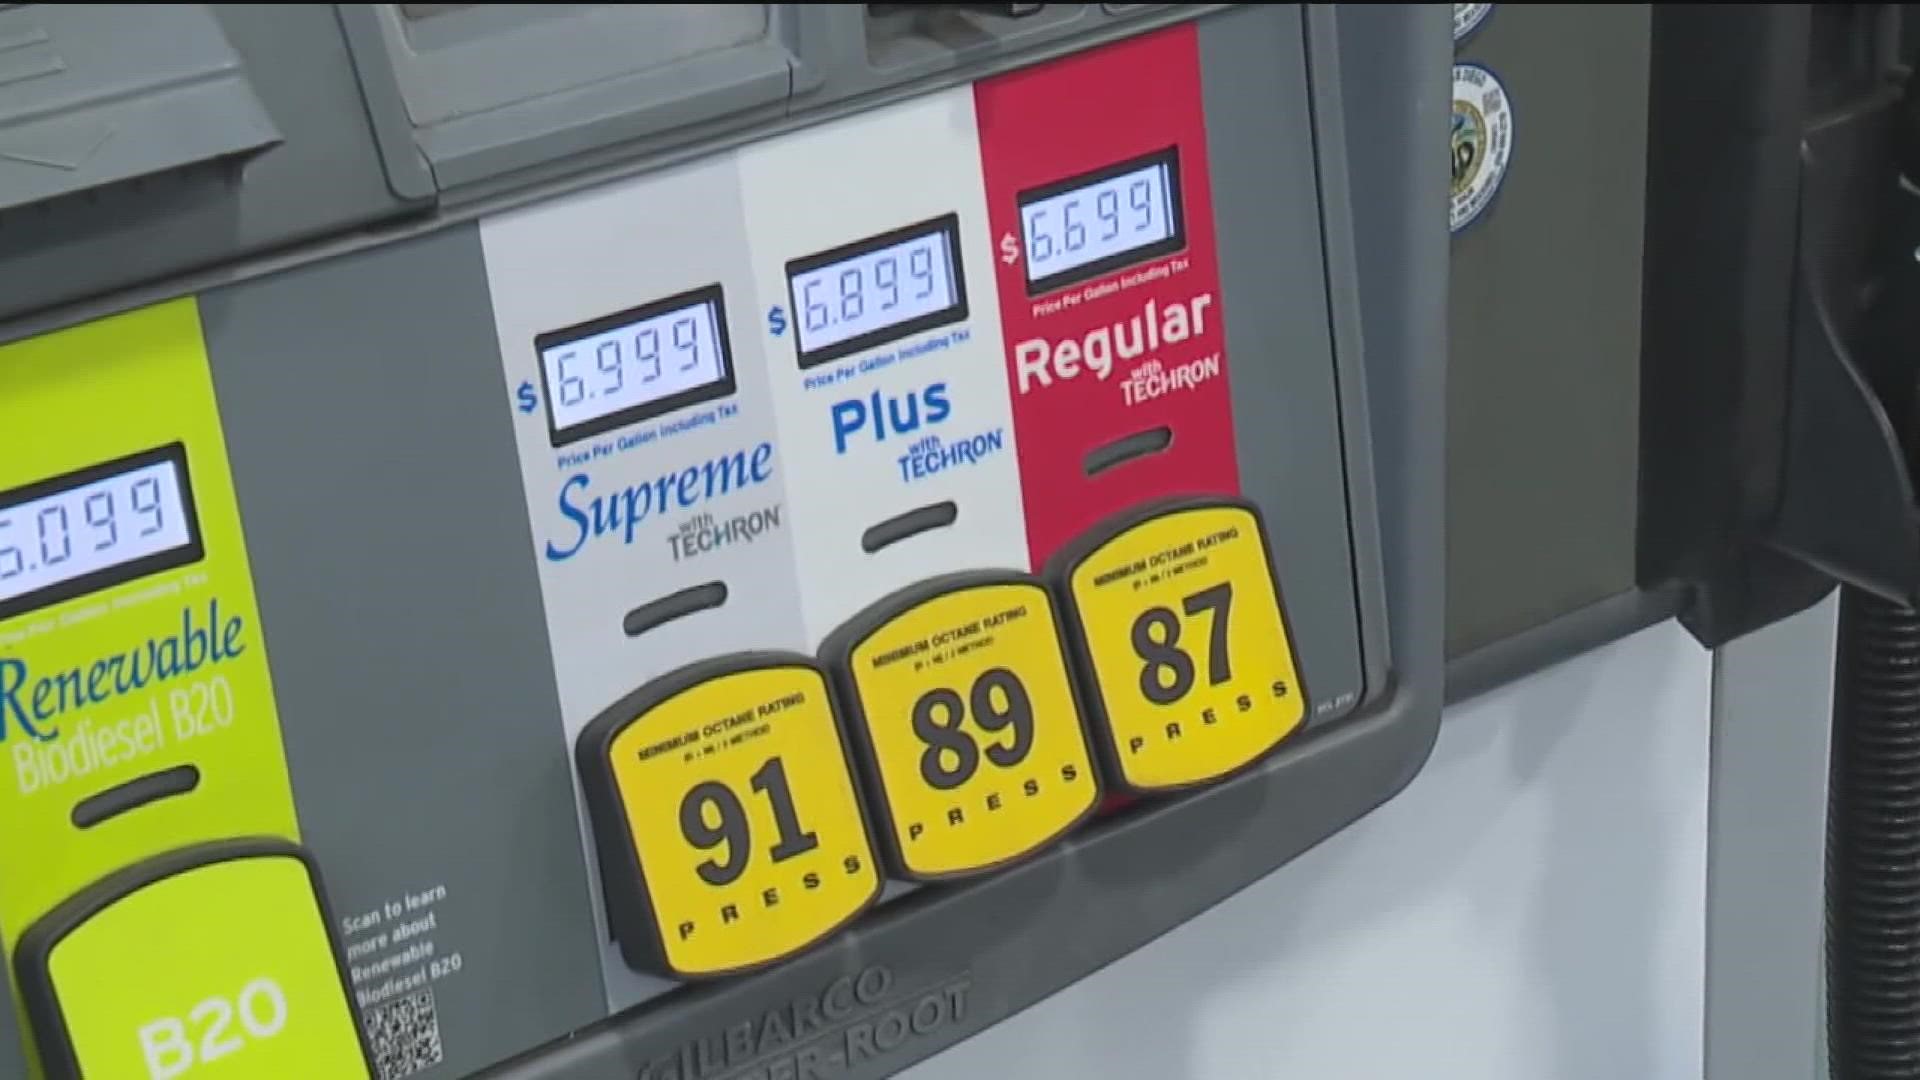 The governor called for a special session to punish oil companies for price gouging.